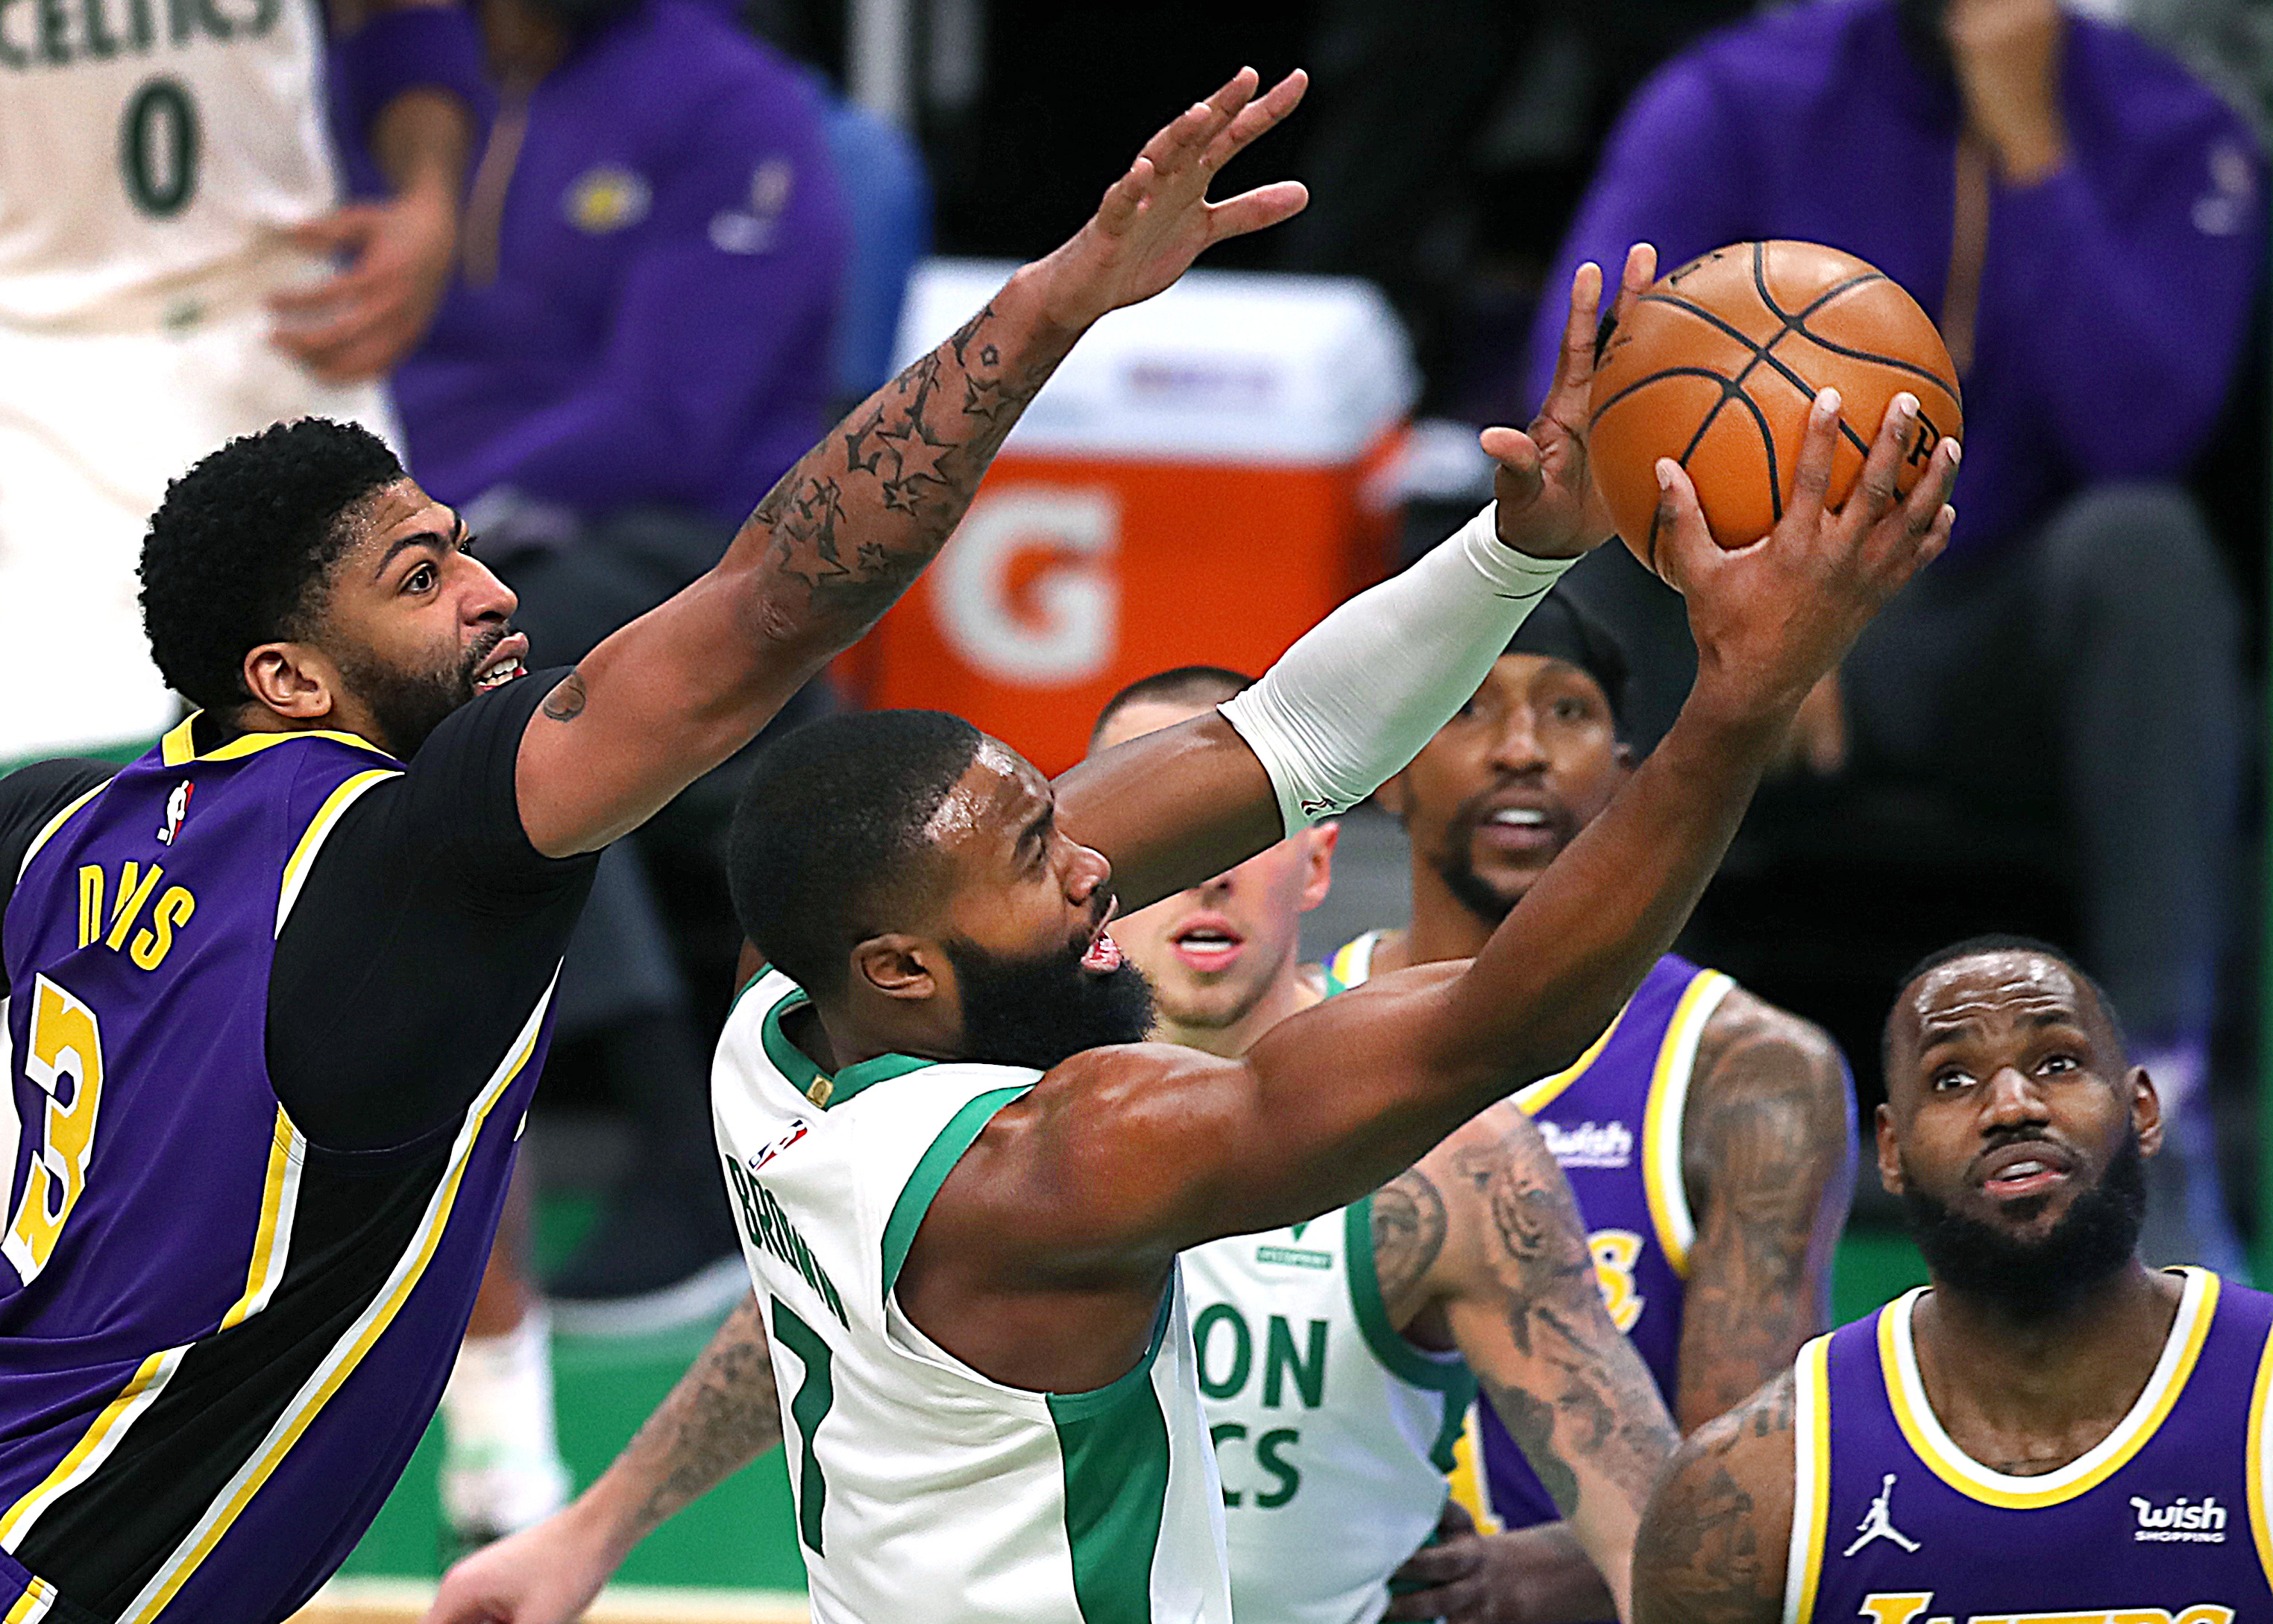 Boston Celtics wing Jaylen Brown drives as Los Angeles Lakers forward Anthony Davis defends during an NBA game in January 2021